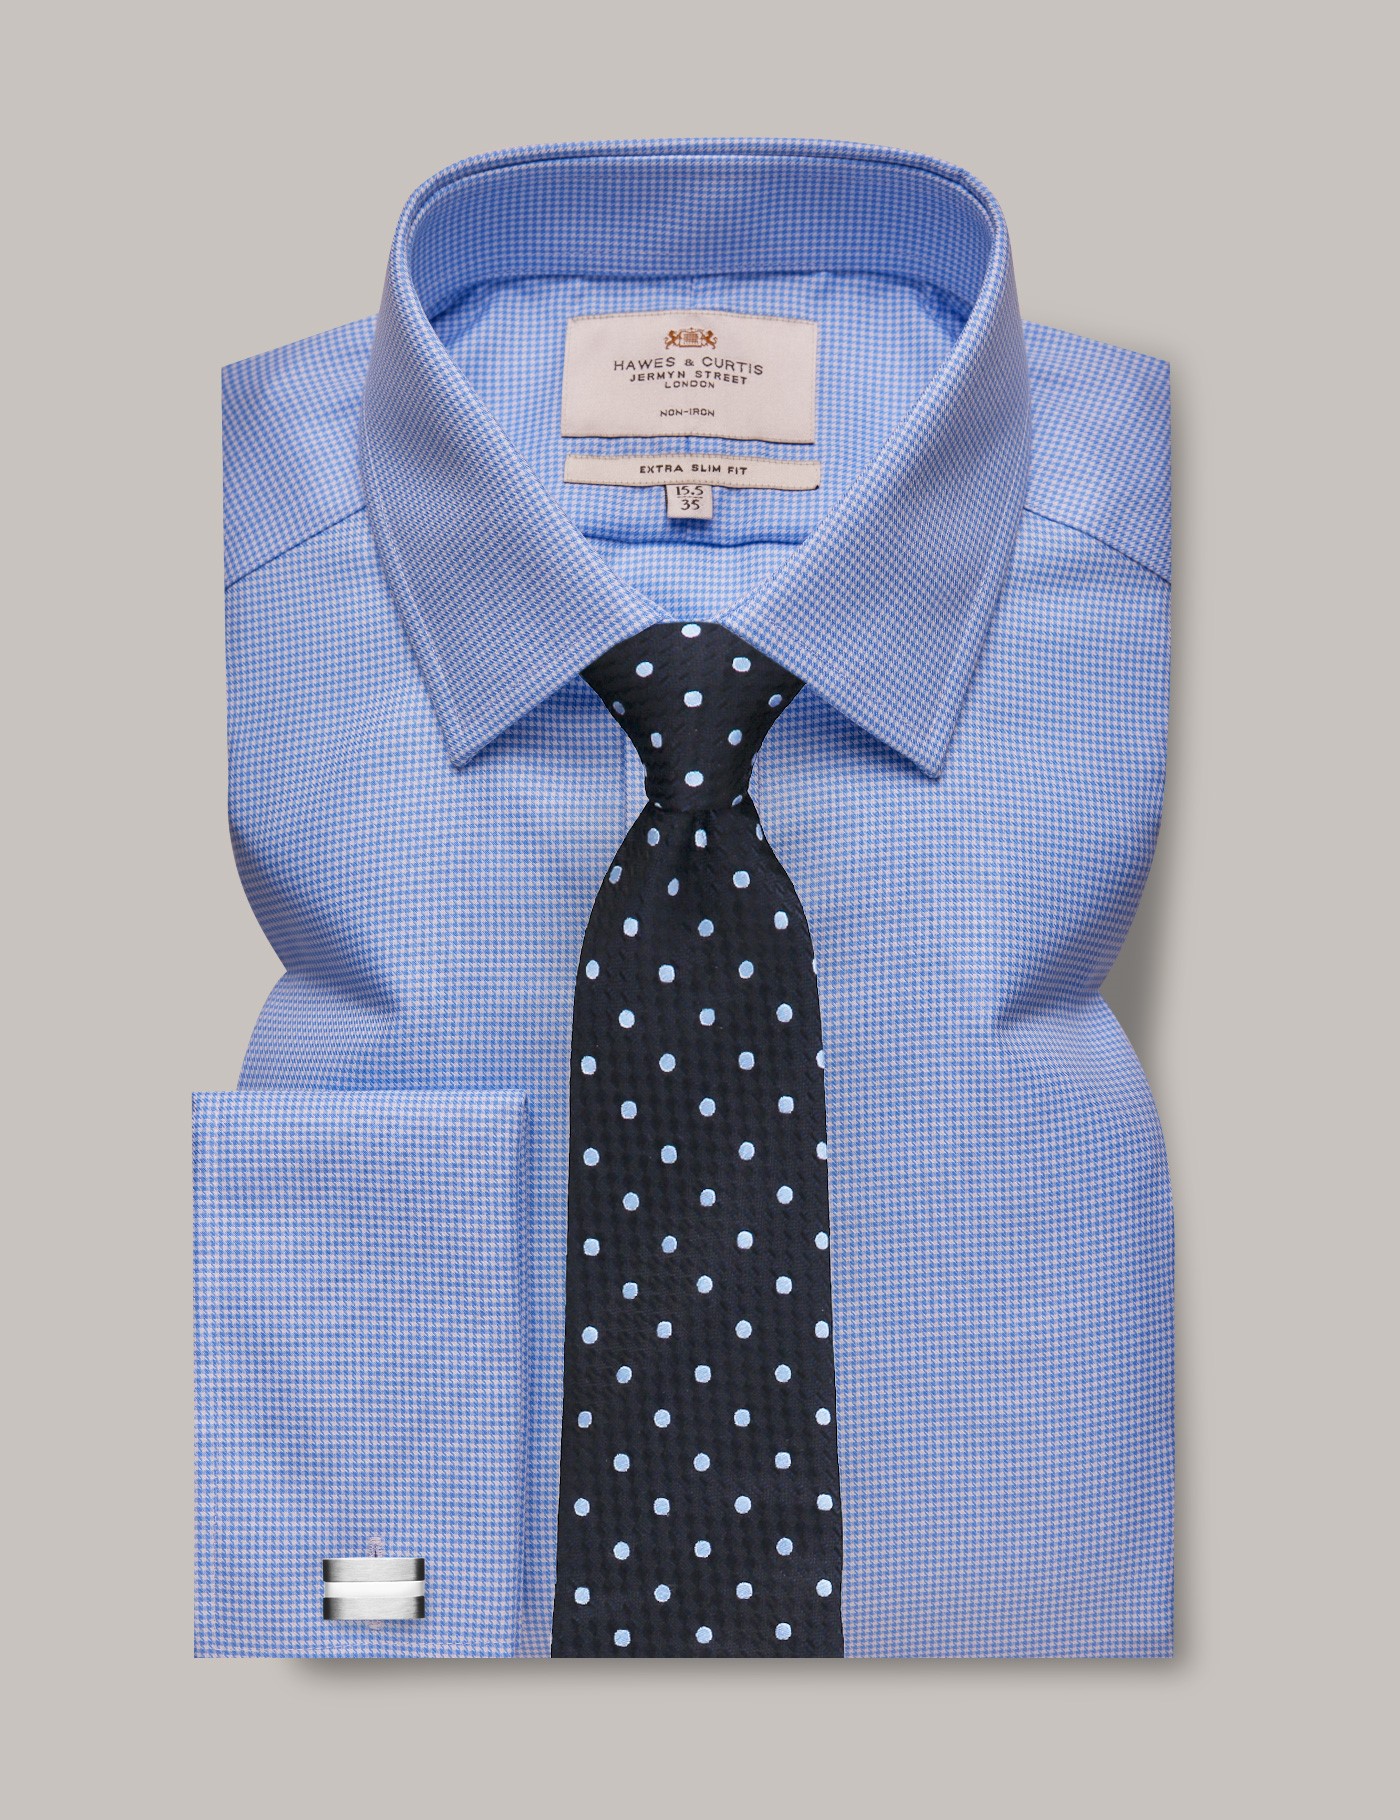 hawes & curtis non-iron white & blue dobby extra slim fit shirt - double cuff